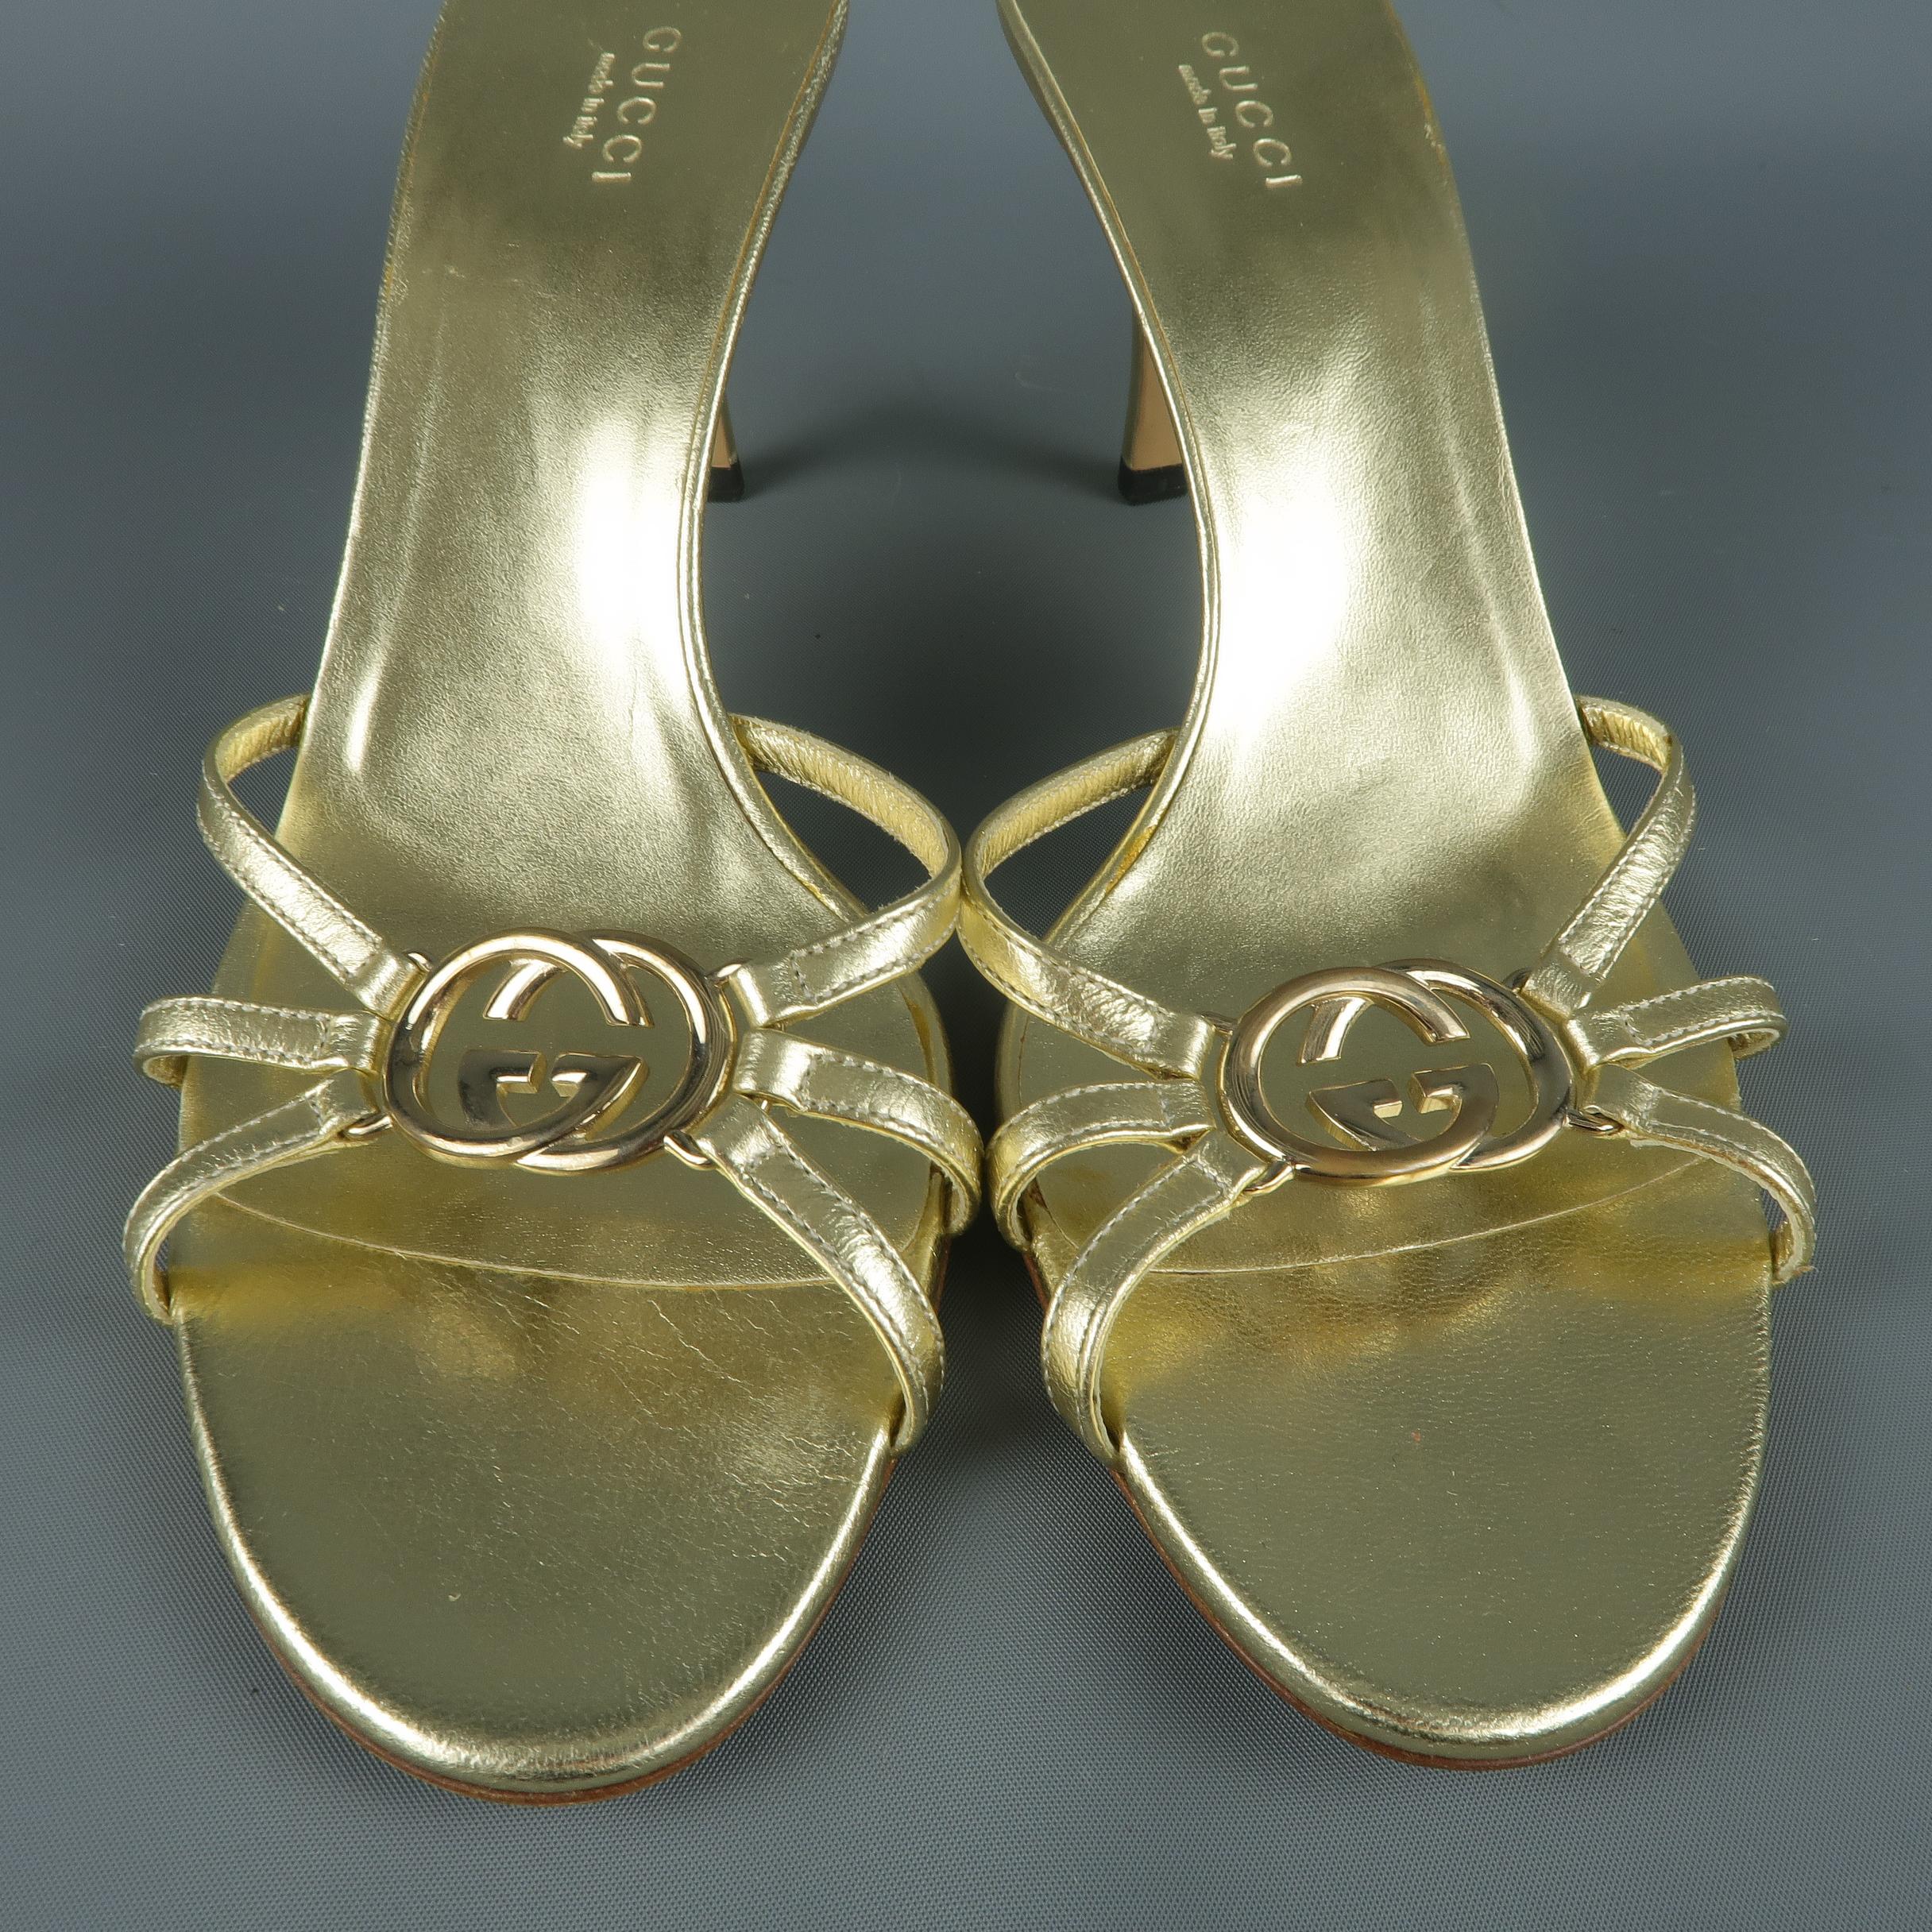 GUCCI mule sandals come in metallic gold leather with a covered stiletto heel and metal GG logo embellished toe strap.  Made in Italy.
 
Excellent Pre-Owned Condition.
Marked: IT 39
 
Measurements:
 
Heel: 3.5 in.